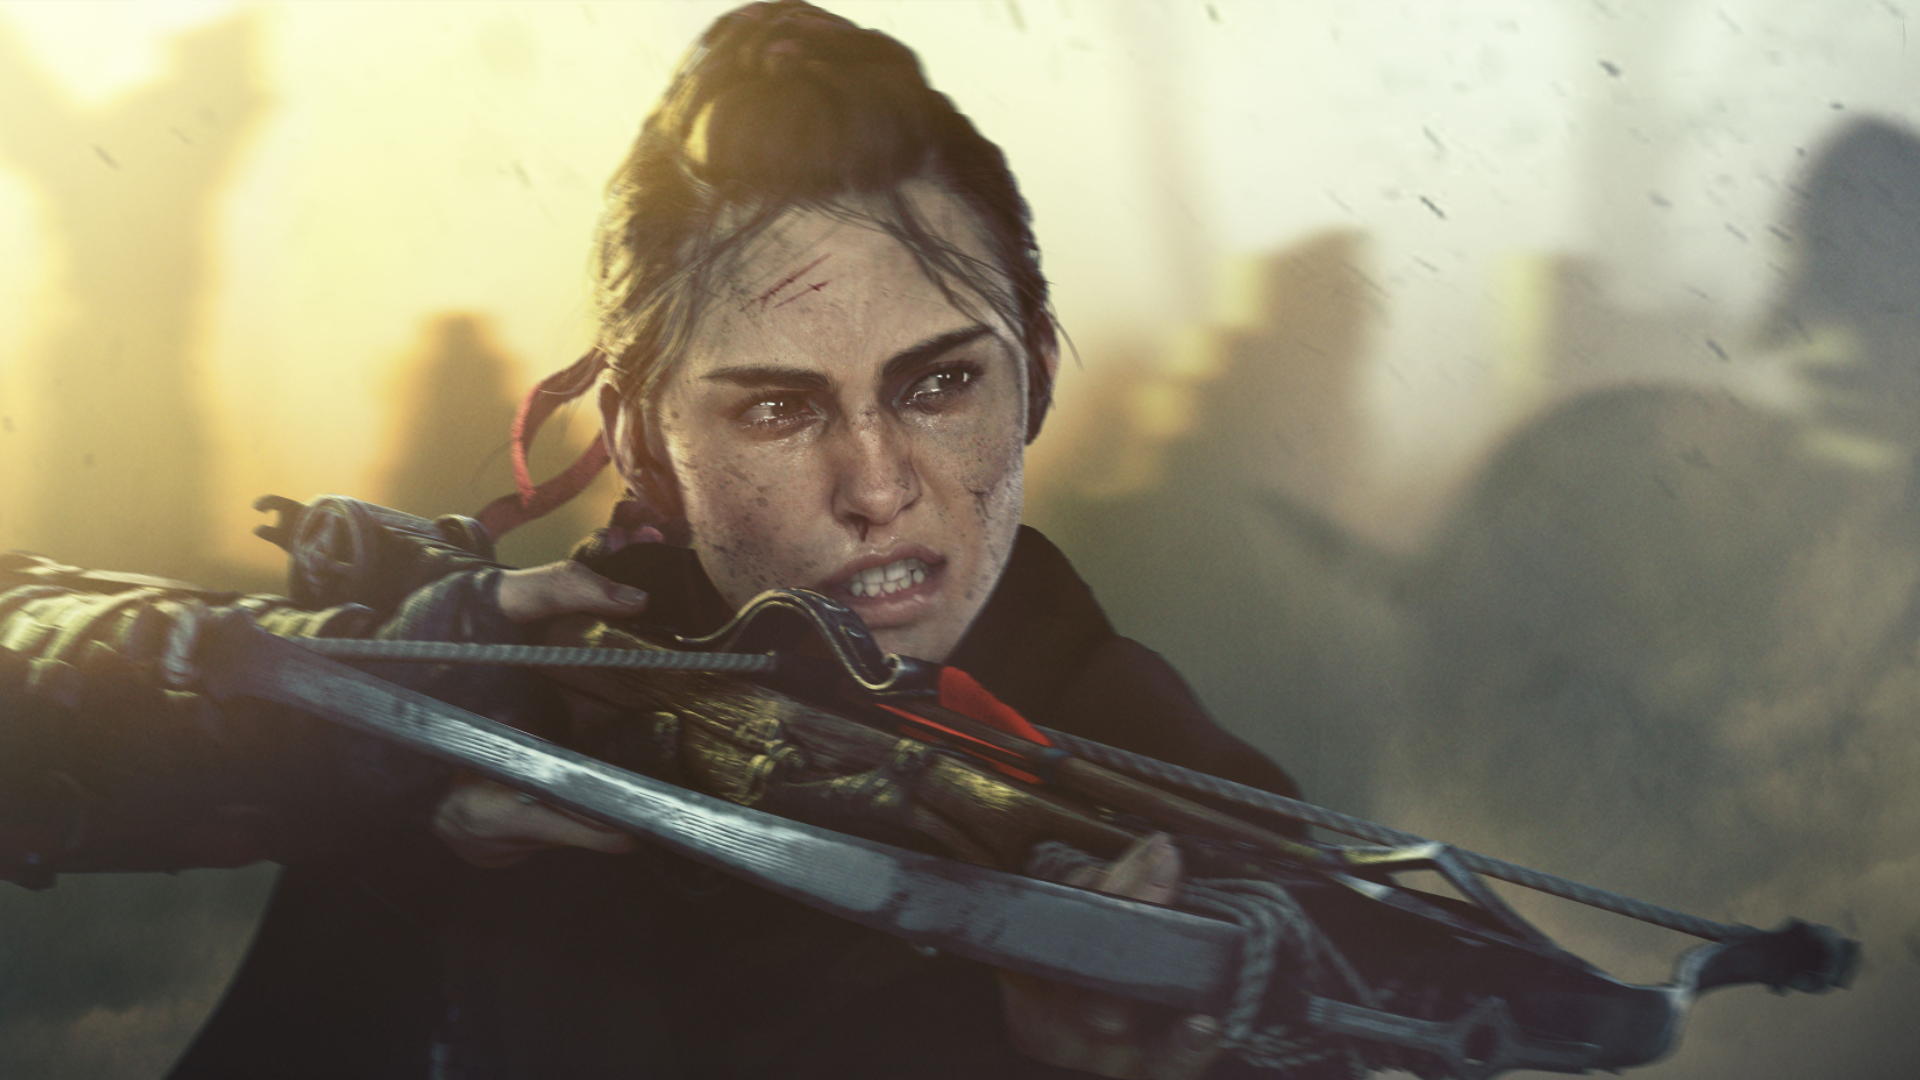 A Plague Tale: Requiem will be on Game Pass at launch